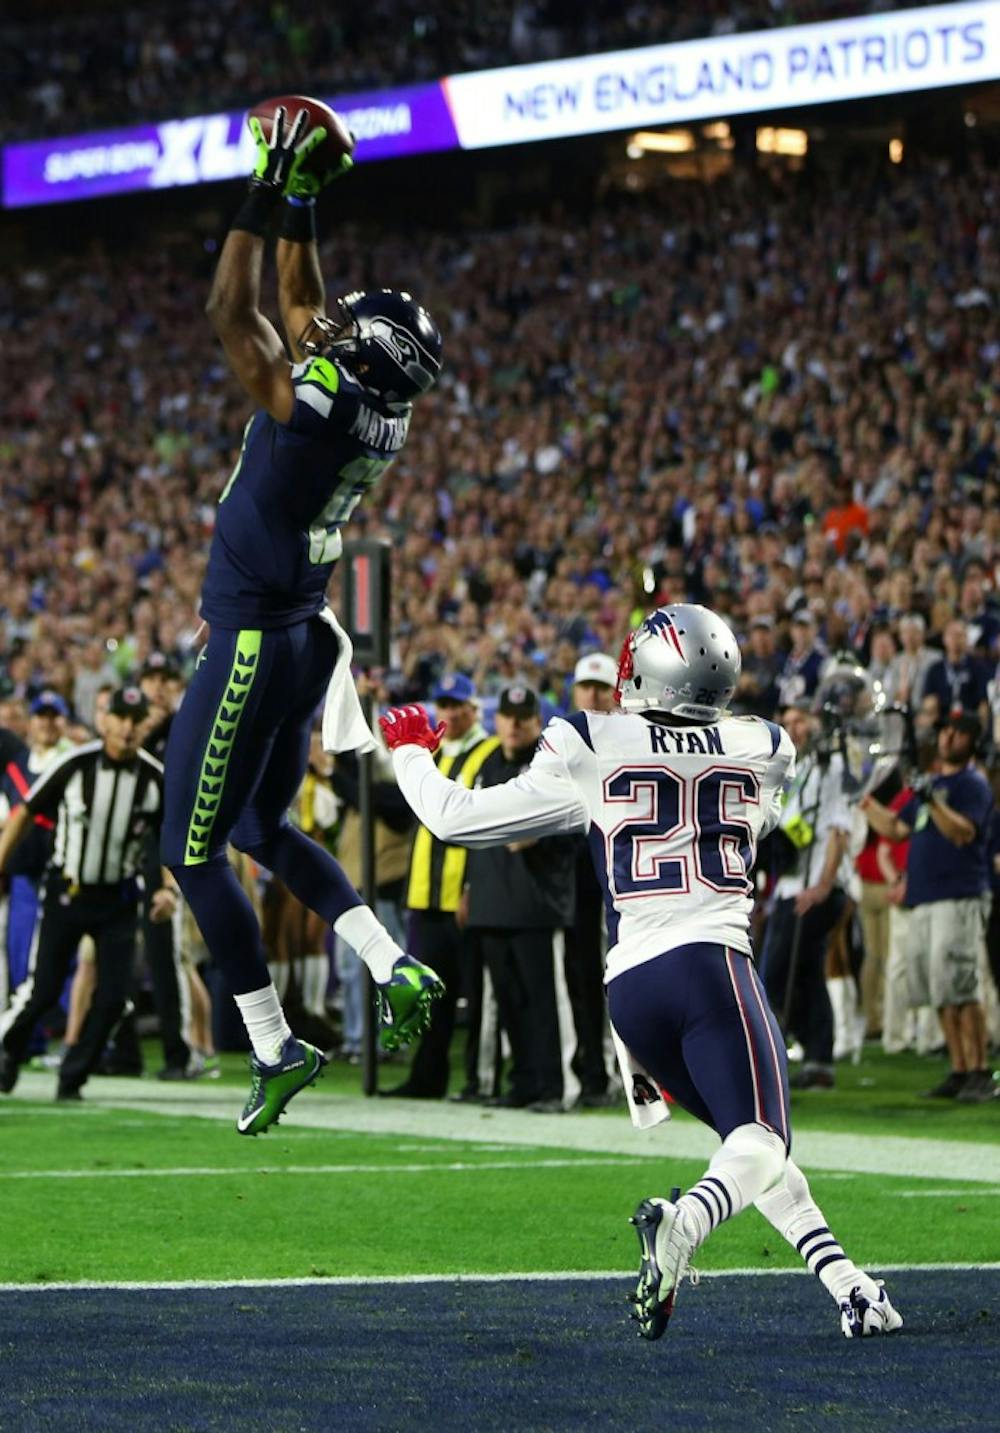 Seahawks wide receiver Chris Matthews catches an 11-yard touchdown catch during the second quarter as the Seattle Seahawks take on the New England Patriots in Super Bowl XLIX at University of Phoenix Stadium on Sunday, February 1, 2015 in Glendale, Ariz. (Bettina Hansen/Seattle Times/TNS) 